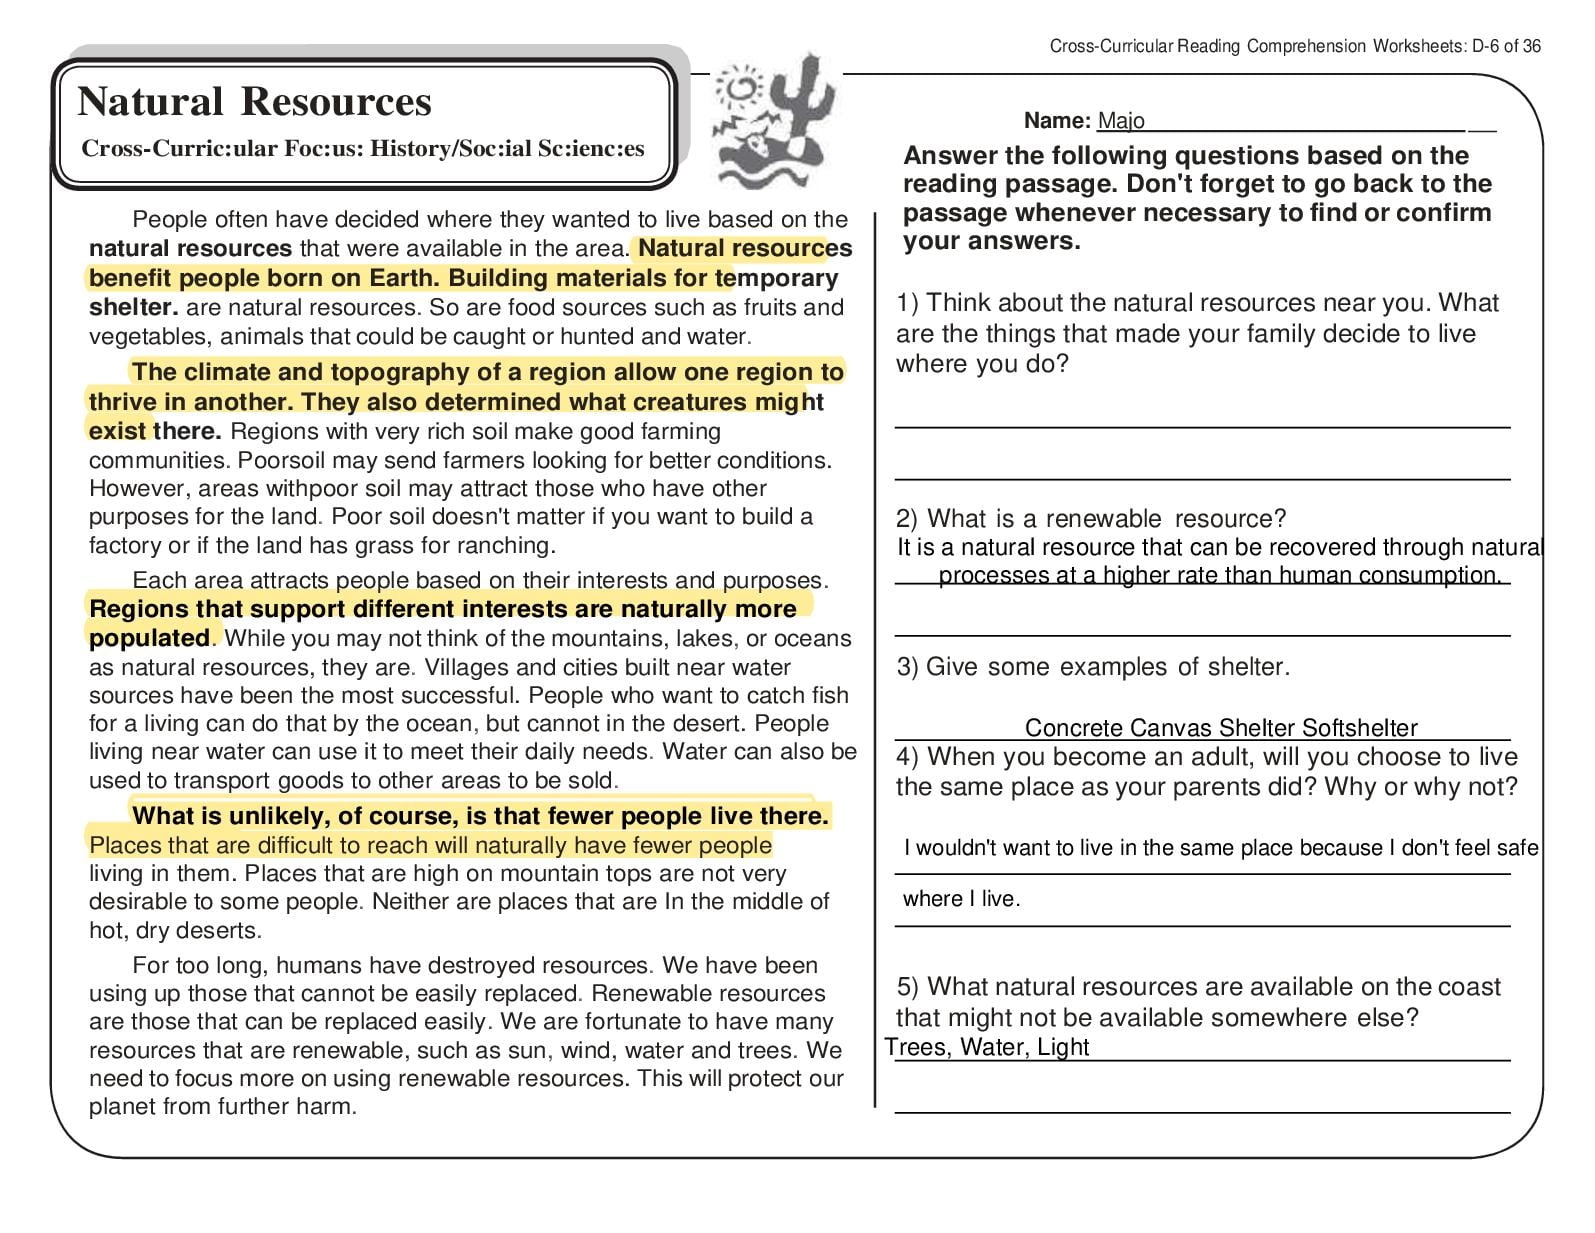 Cross-curricular Reading Comprehension Worksheets